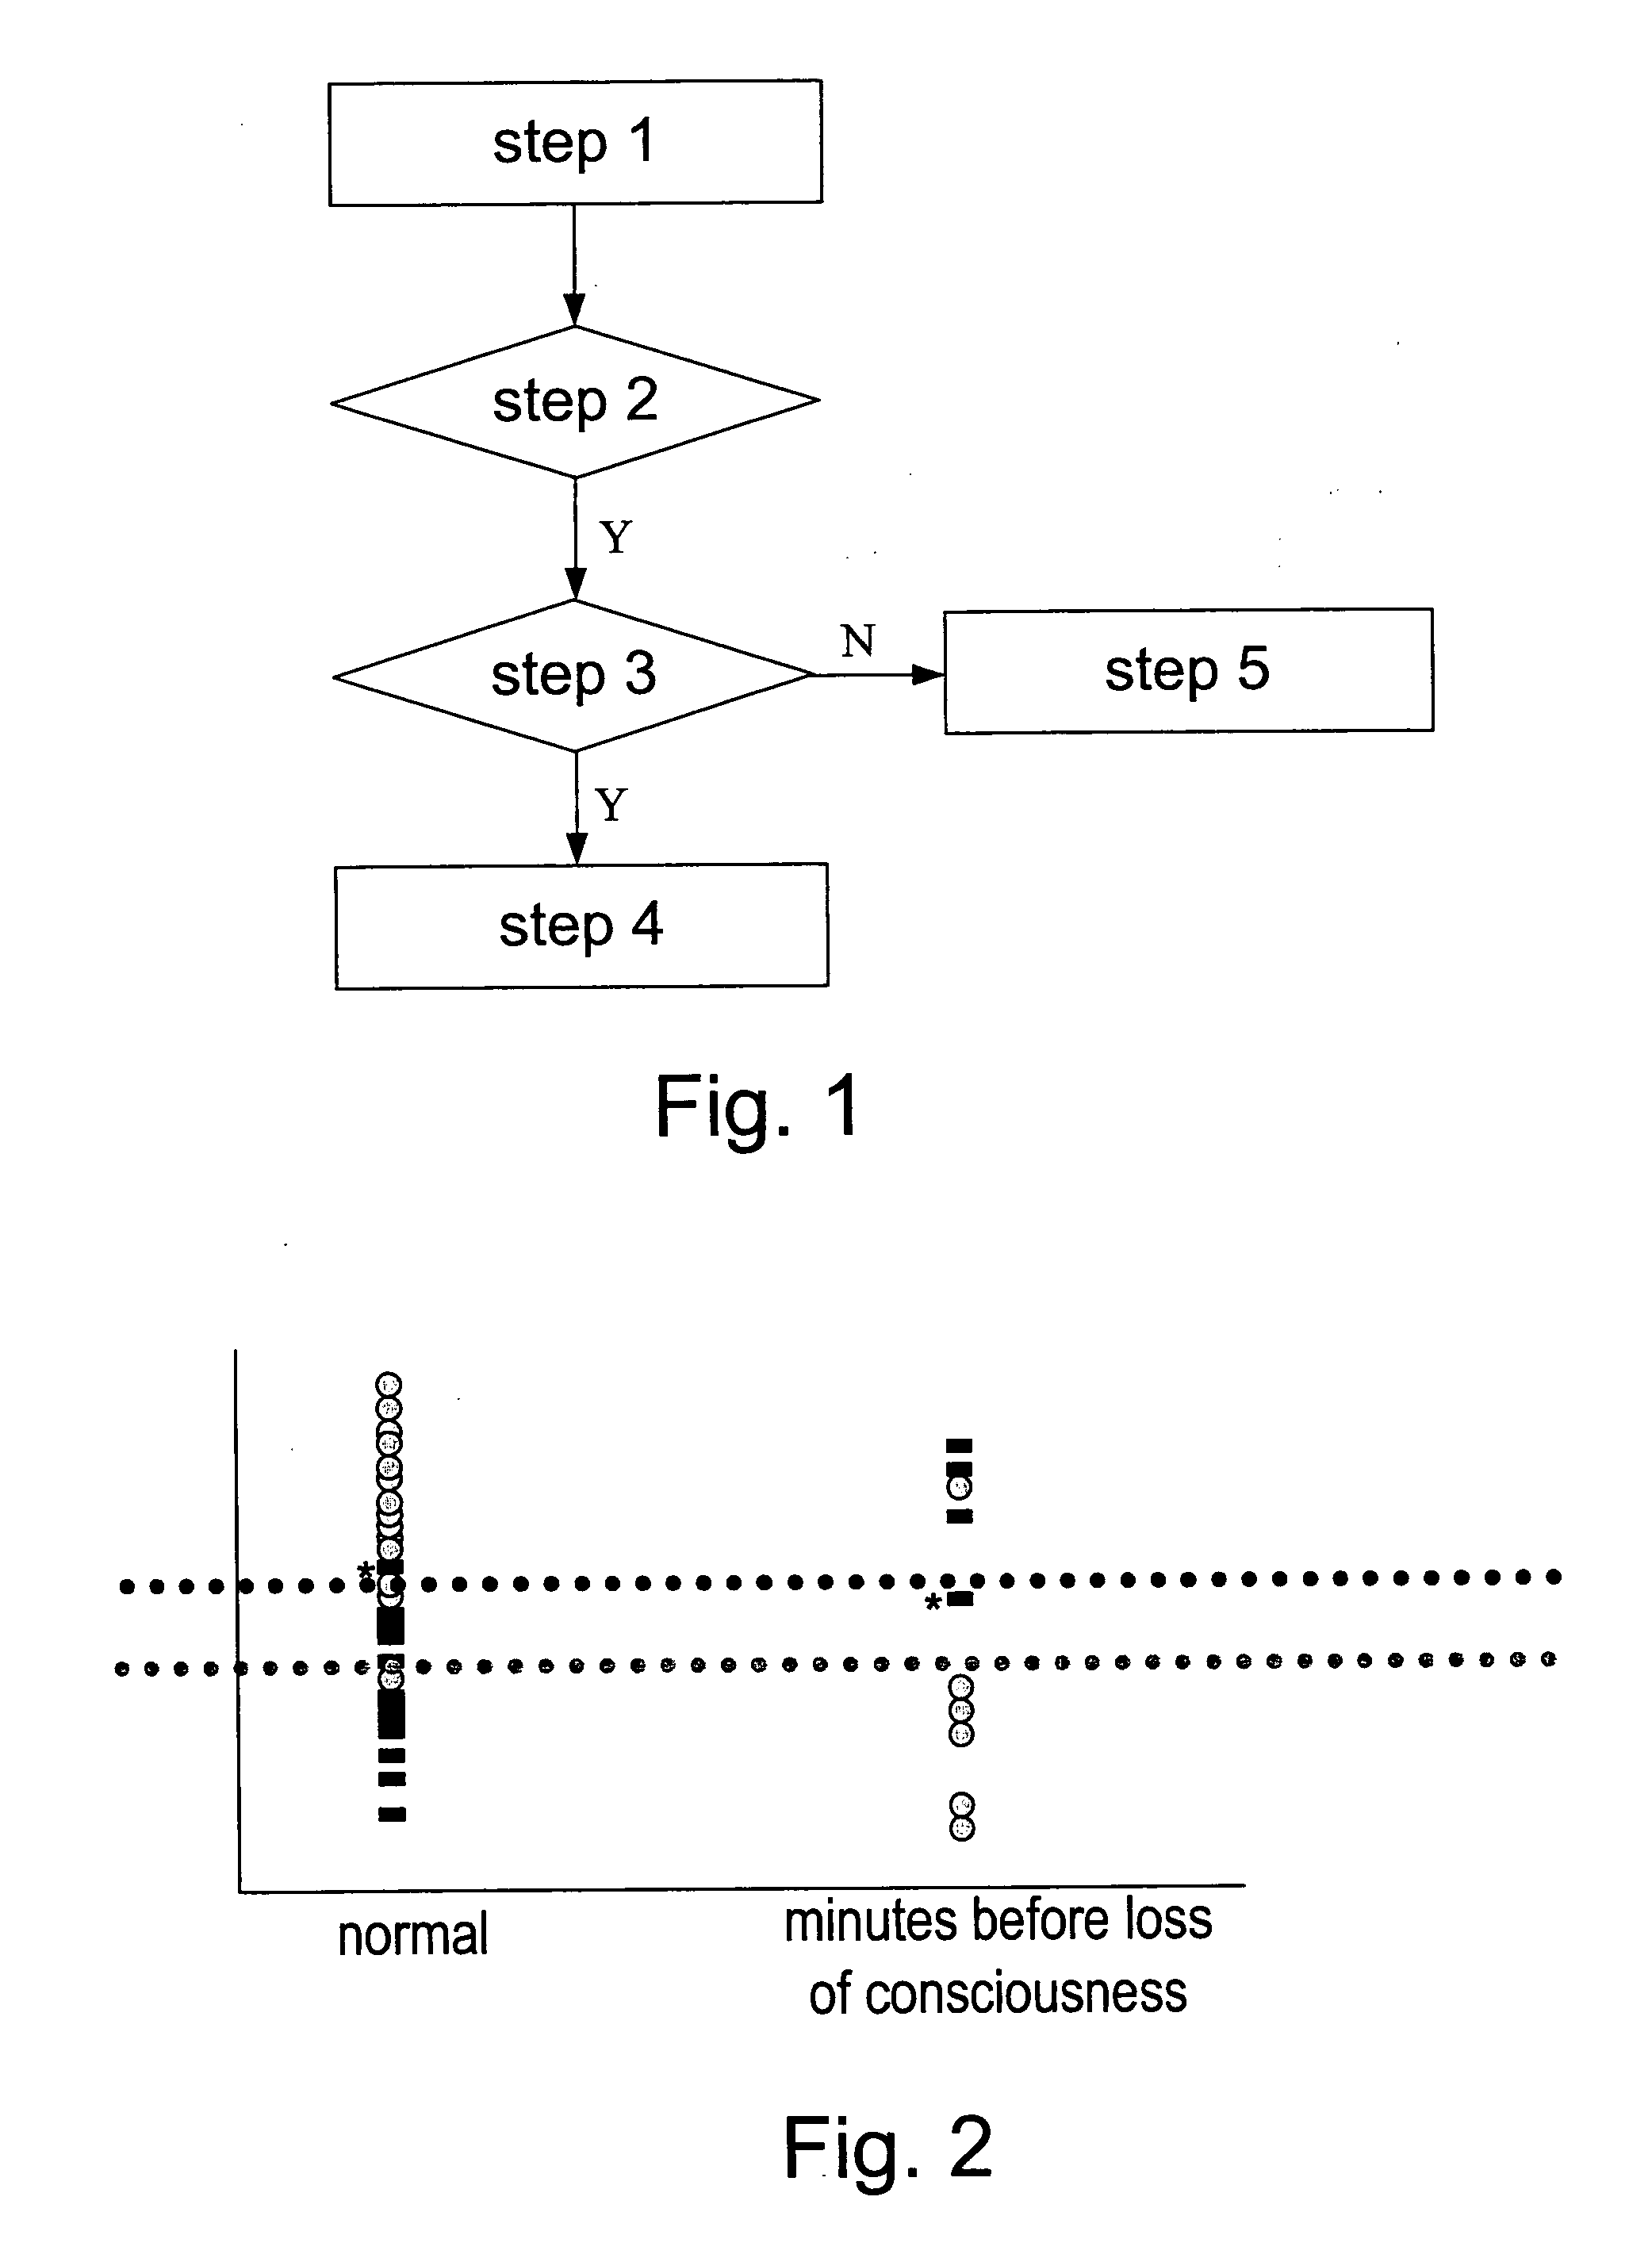 Method and system for detection of pre-fainting and other conditions hazardous to the health of a patient